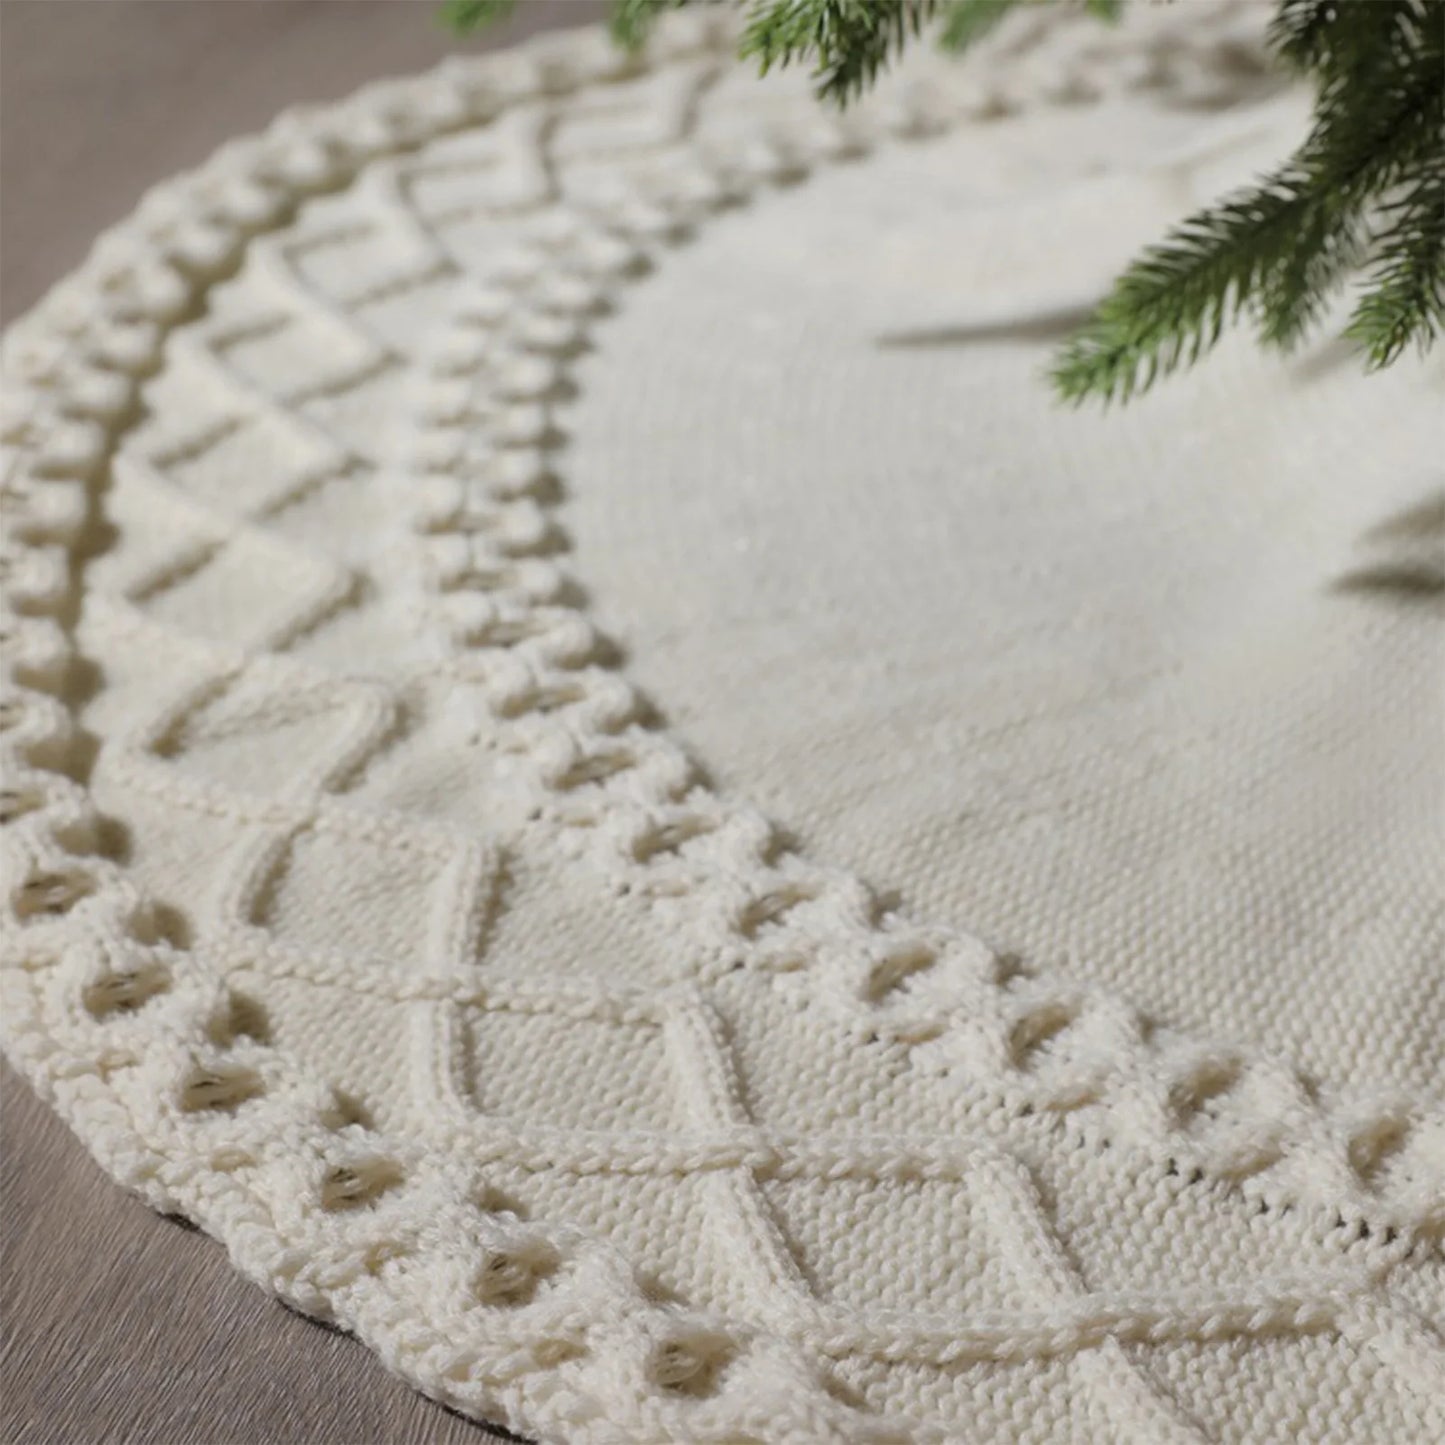 Rustic Knitted Christmas Tree Skirt